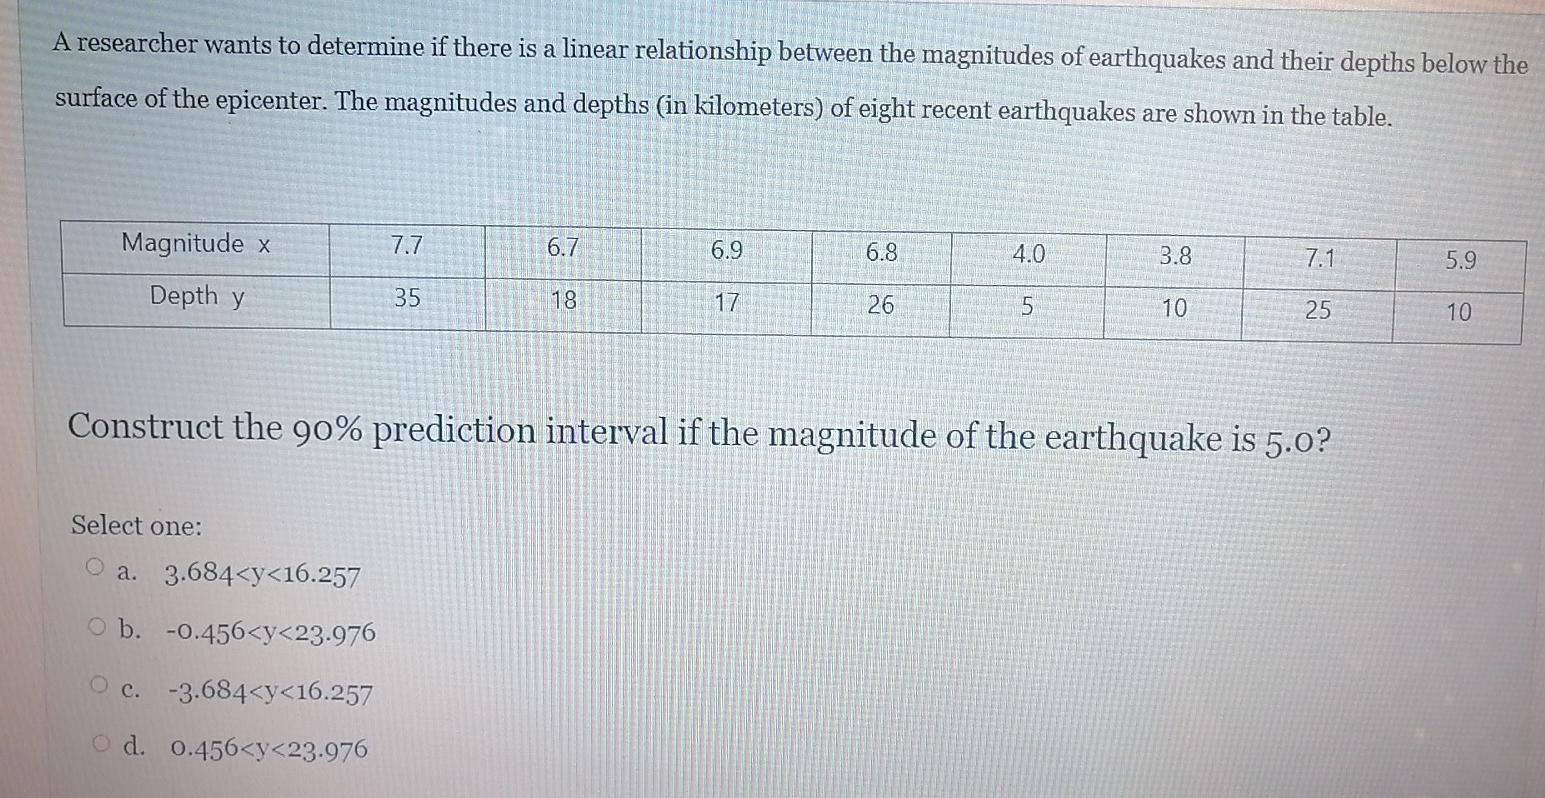 A Researcher Wants To Determine If There Is A Linear Relationship Between The Magnitudes Of Earthquakes And Their Depths 1